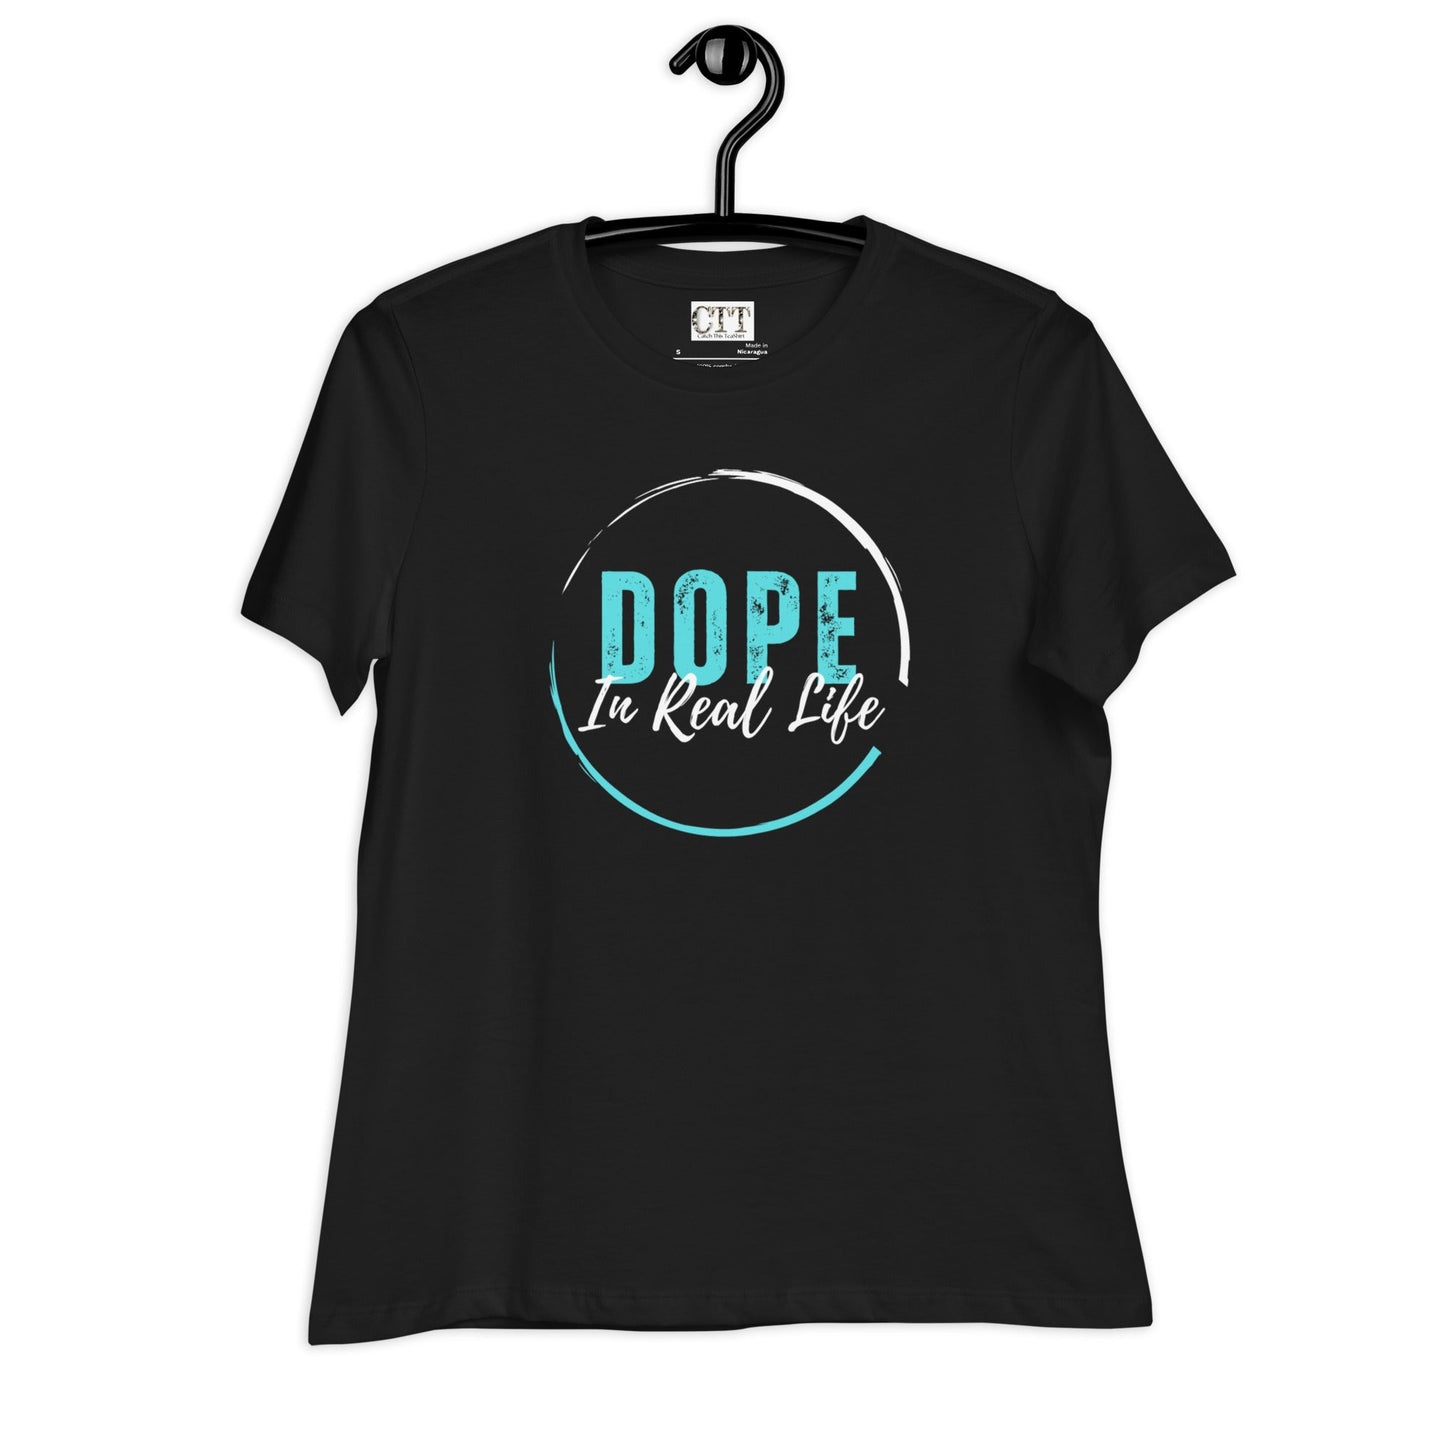 Dope In Real Life Women's Relaxed T-Shirt - Catch This Tea Shirts